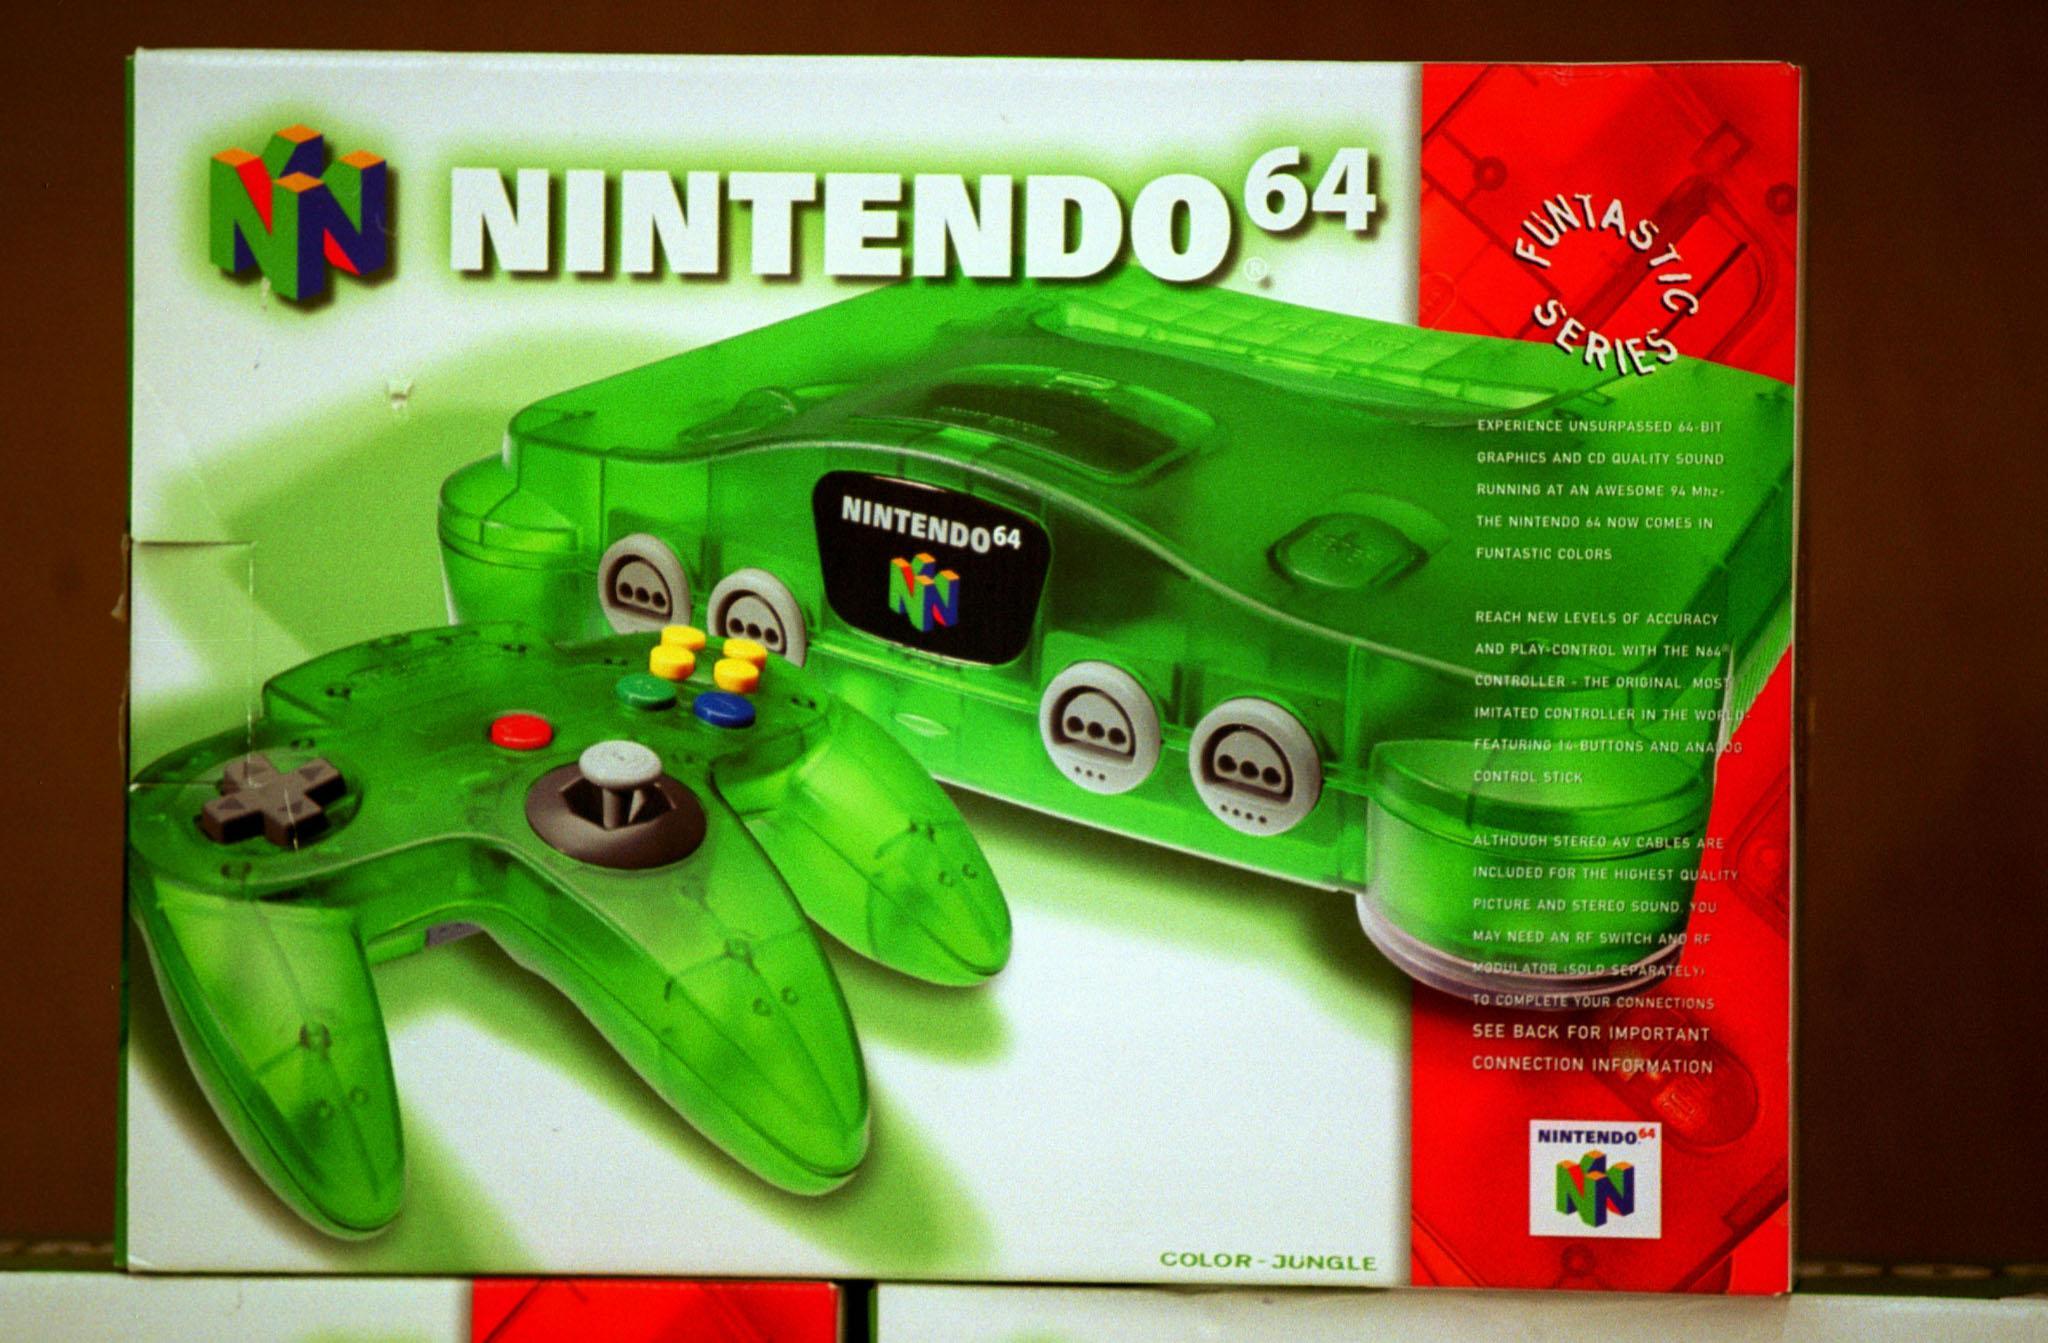 Nintendo 64 might be revived in a new, 'classic' edition ...